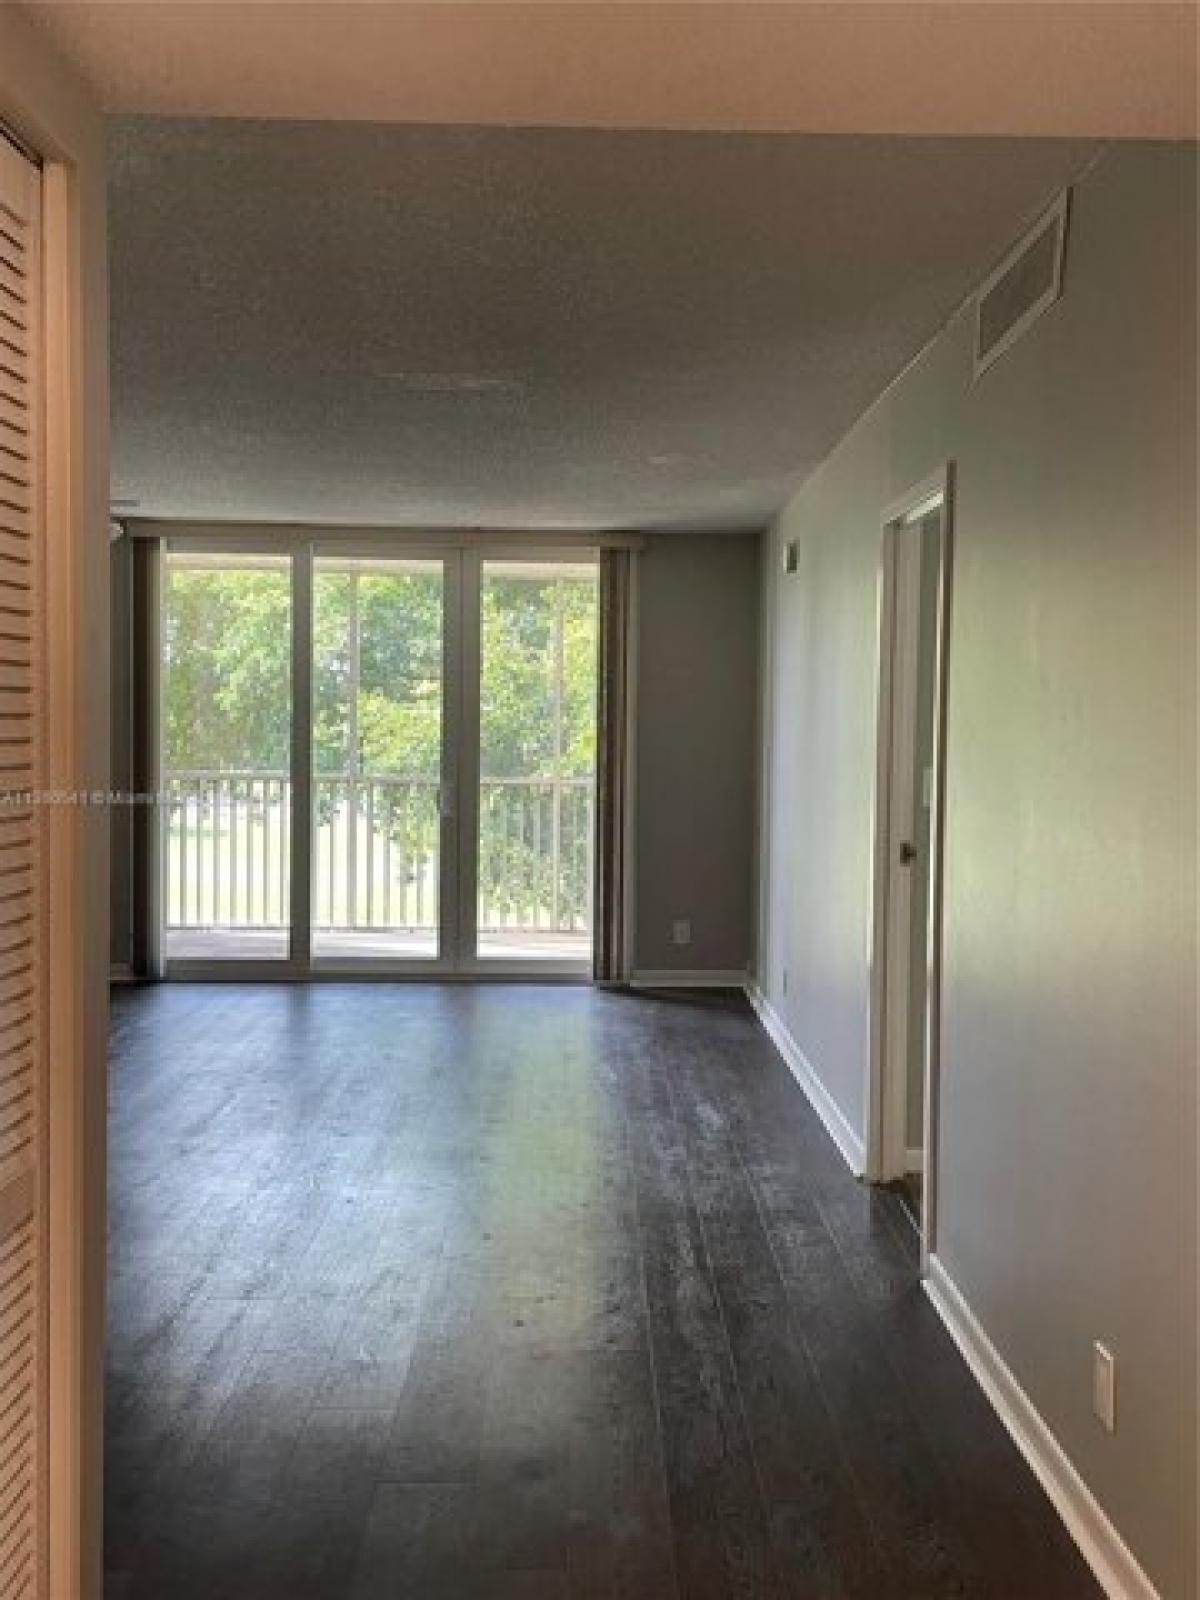 Picture of Apartment For Rent in Plantation, Florida, United States